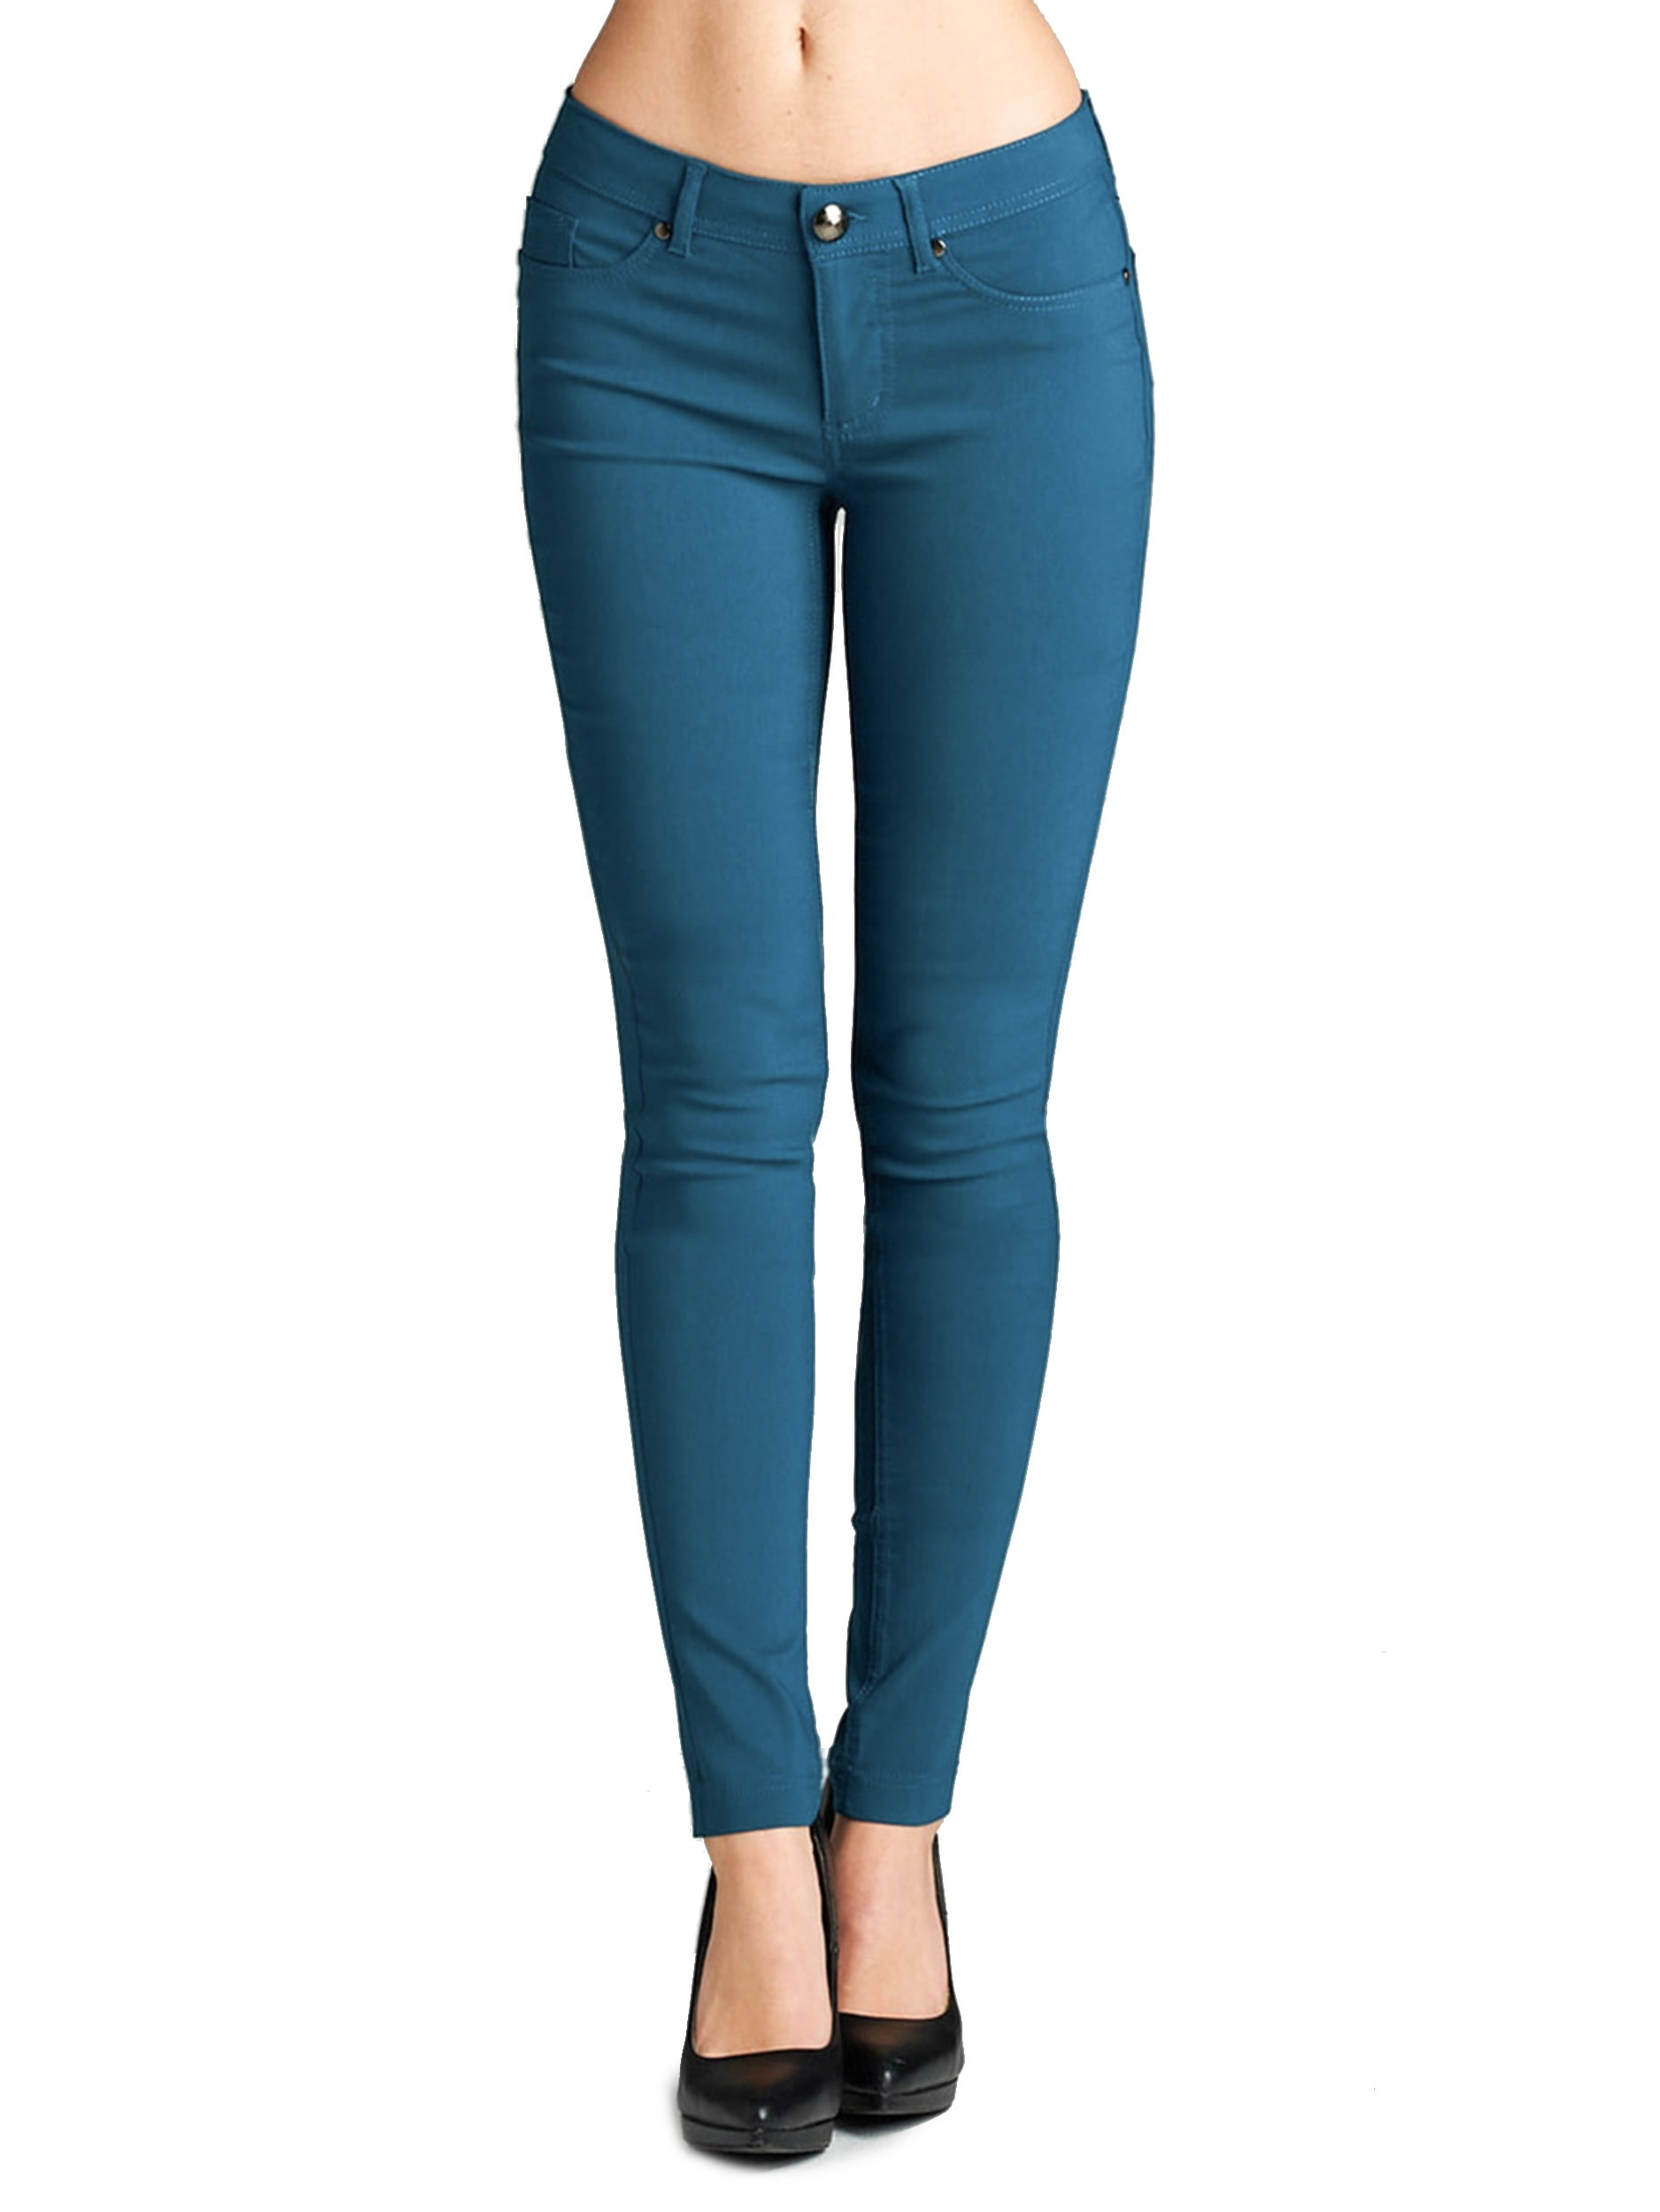 Women's Basic Stretch Spandex Solid Color Comfy Skinny Jeggings Pants ...